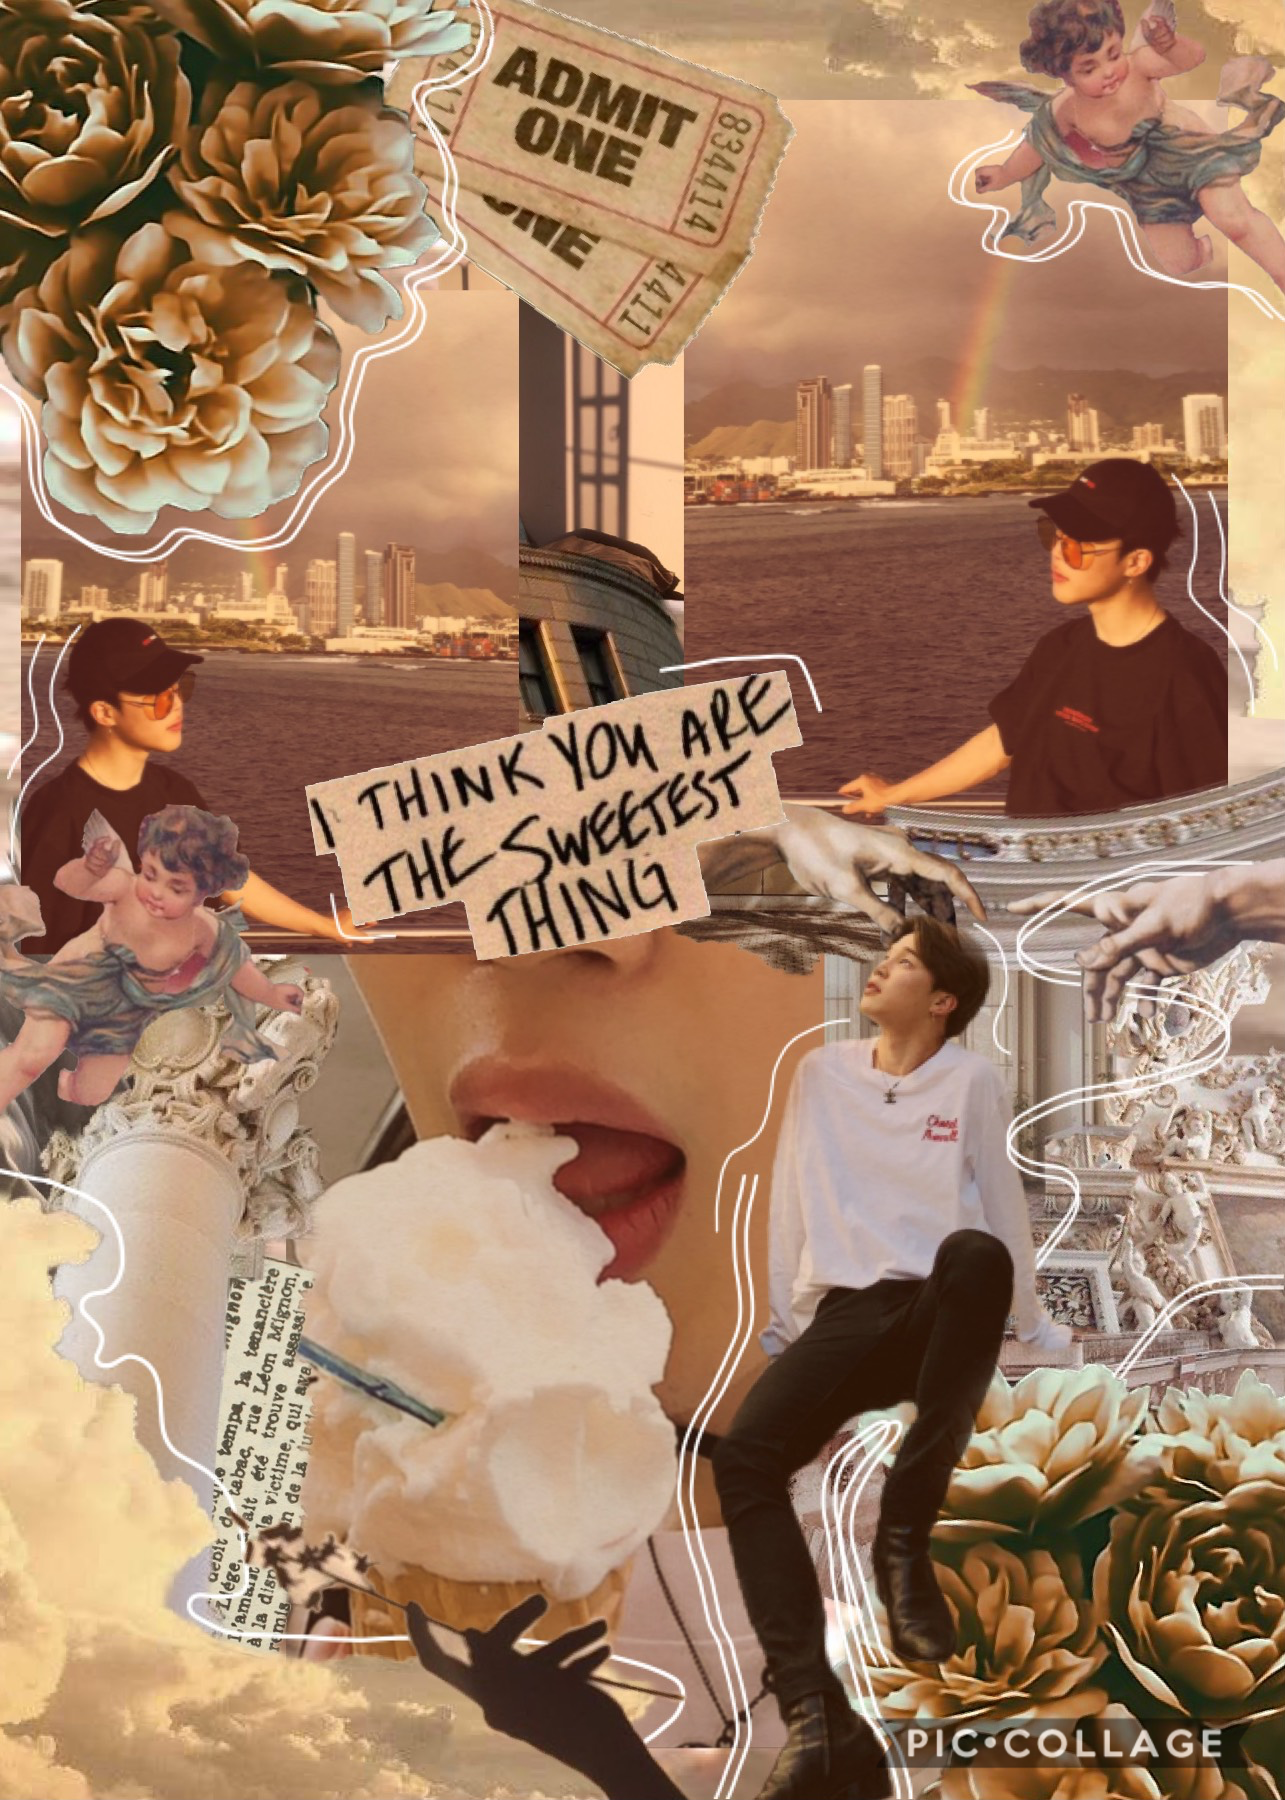 —tap—

⭐️ HAPPY JIMIN DAY ⭐️
I hope you have a wonderful day Jimin, you always cheer me up when I’m down, you mean so much to me ❤️ remember to look after yourself and stay happy 😁

inspired by @moonjoon she is one of my all time favourite collagers 💕